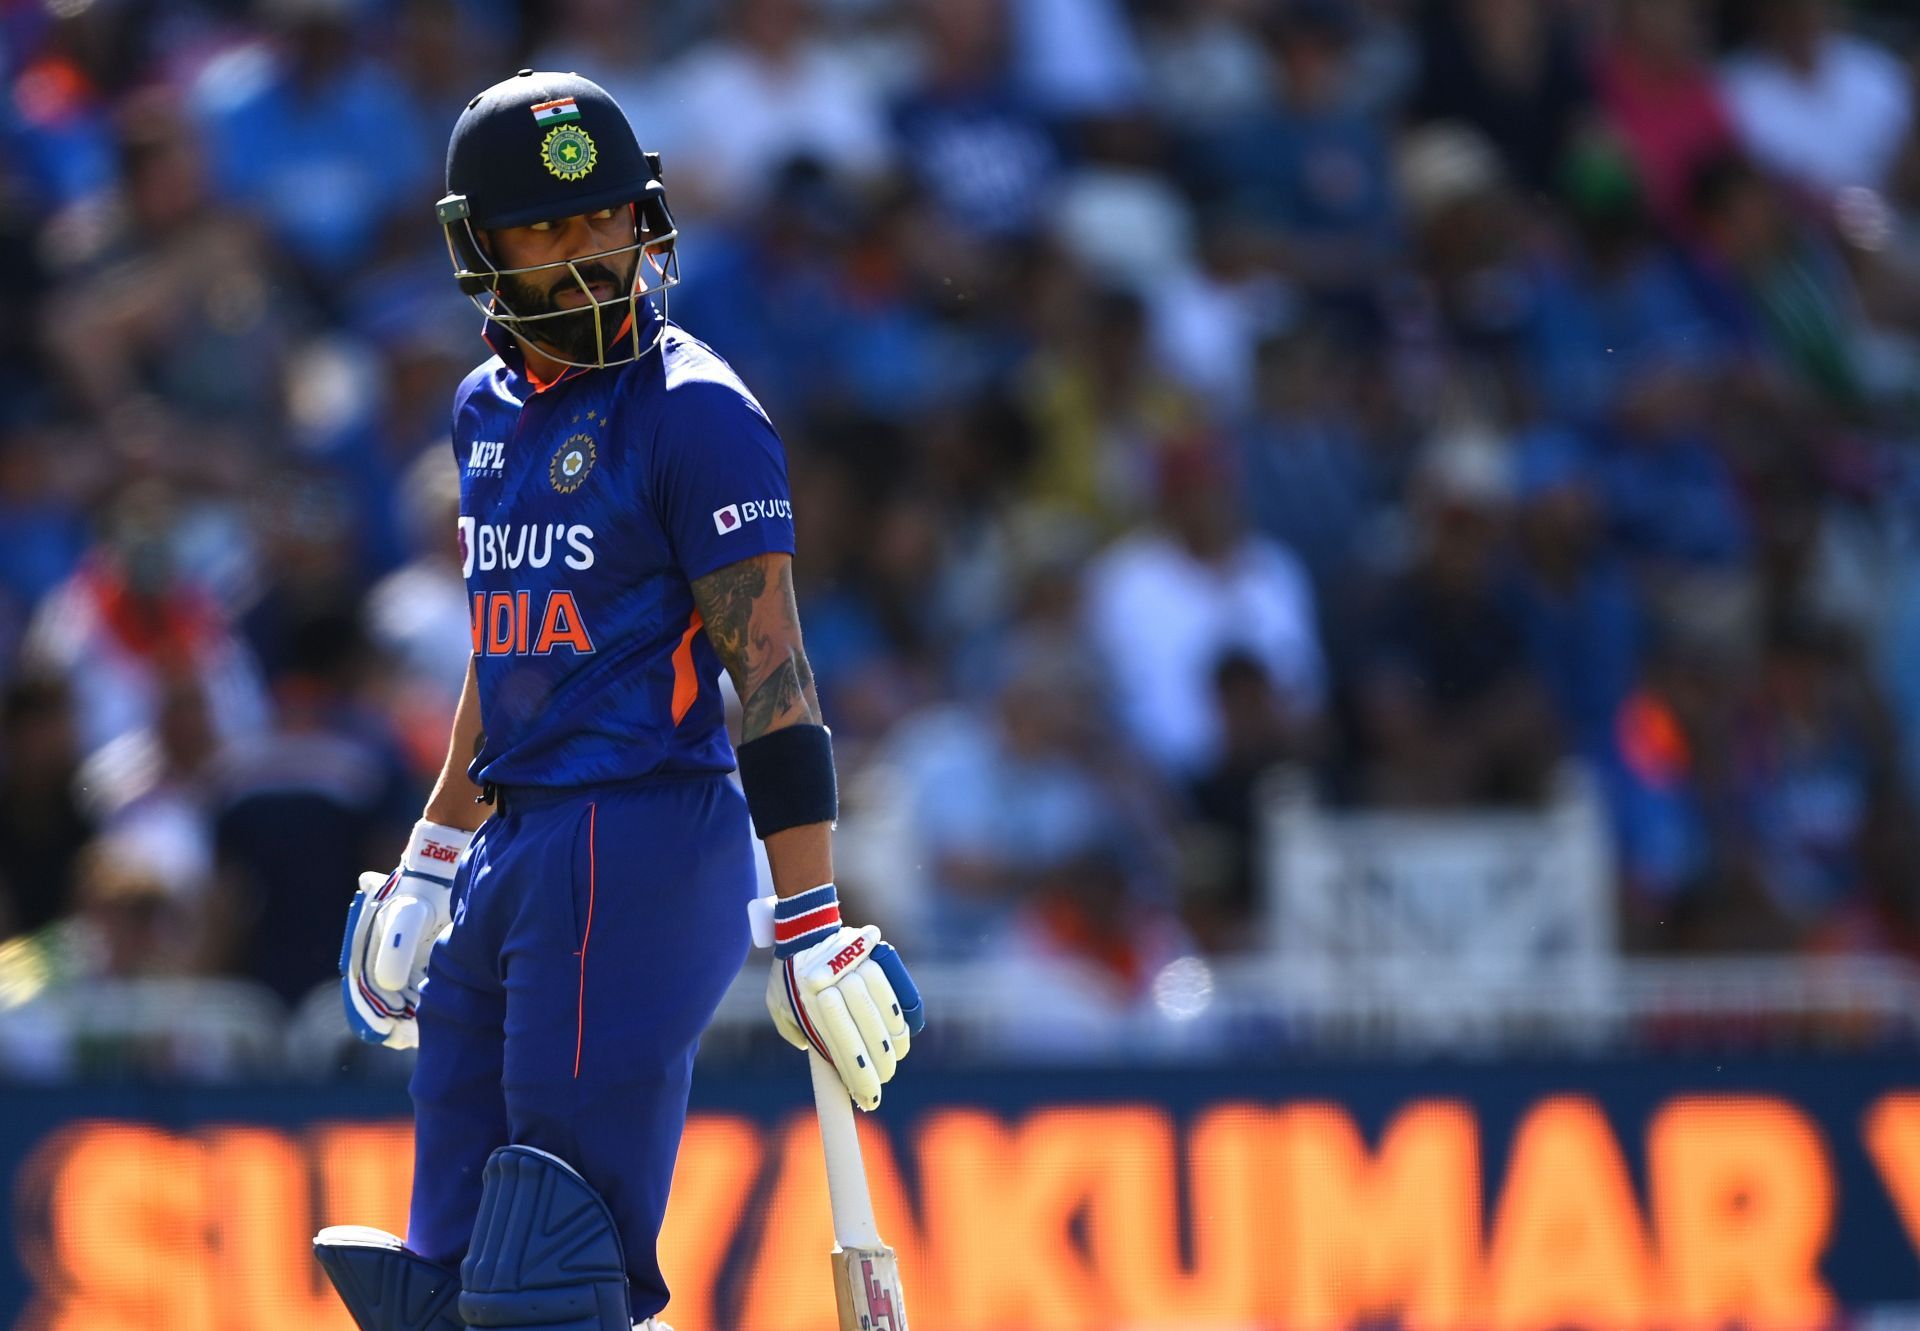 Virat Kohli missed the first ODI against England due to a groin injury